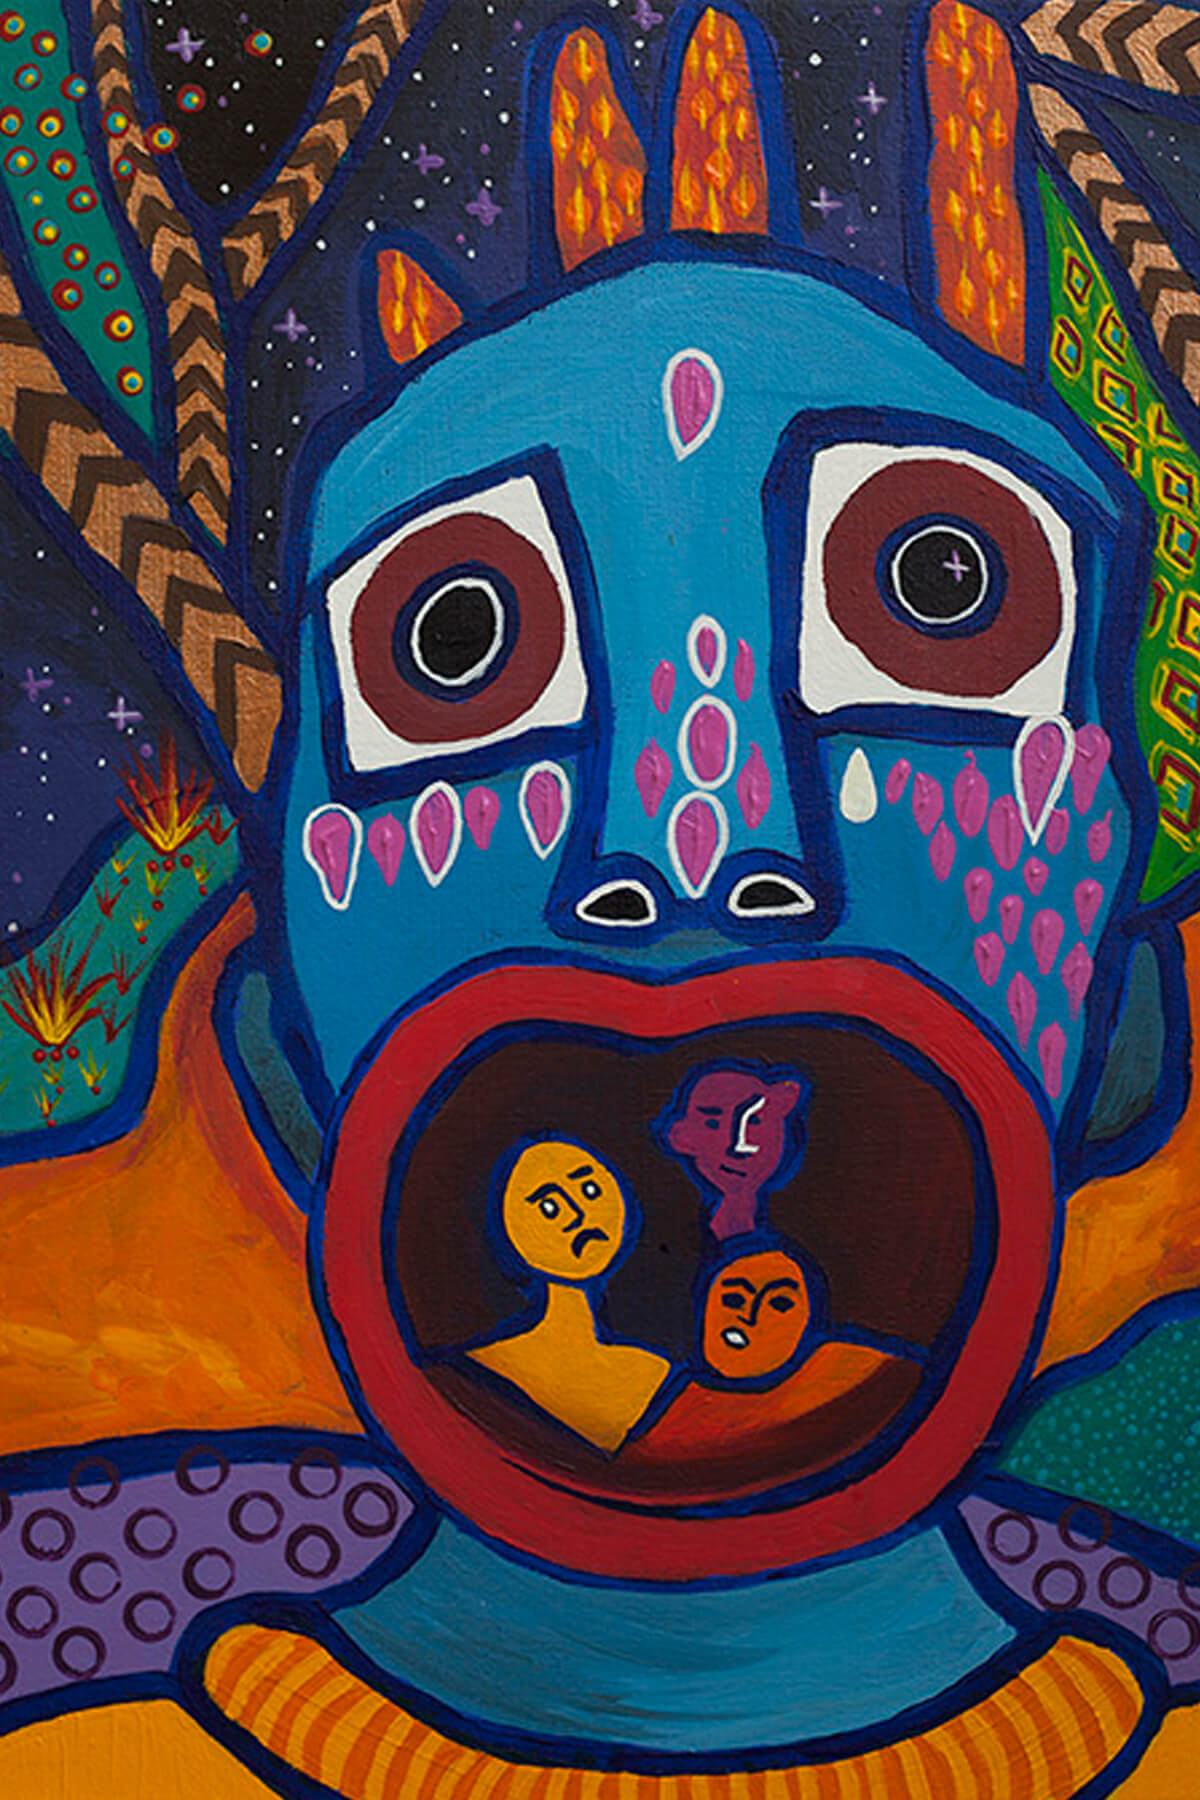 A painting in bright bold colors set against a starry night sky, a face or mask of blue with pink designs on its cheeks holds its mouth open in a near perfect circle. Within the red circle of the mouth three smaller figures can be seen, from head to shoulders, one yellow, one orange, one purple. Behind the blue head, a fanstasy landscape of stripe patterned, polka dot patterned, and diamond patterns tree trunks and verticals.